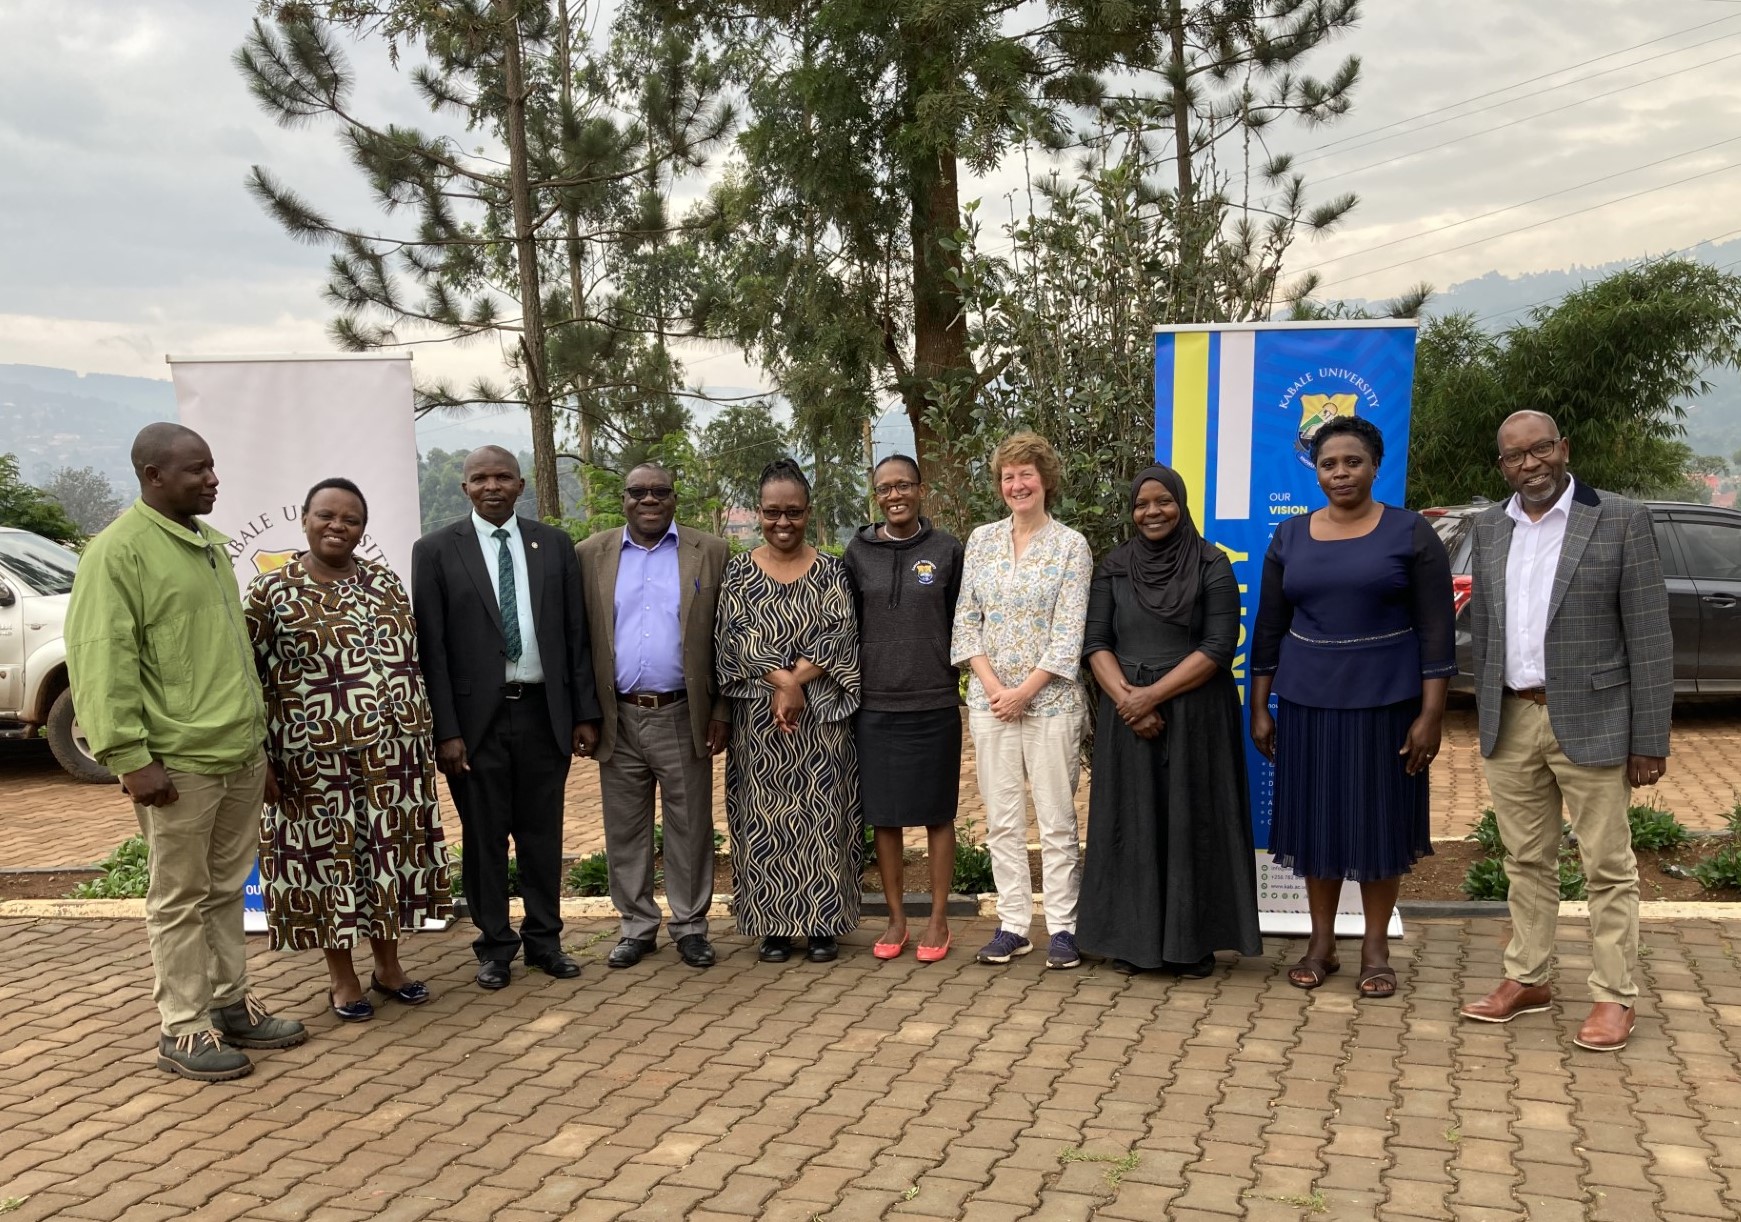 Rosie Trevelyan, Director of the Tropical Biology Association, got an official welcome to Kabale University by the office of the Vice Chancellor